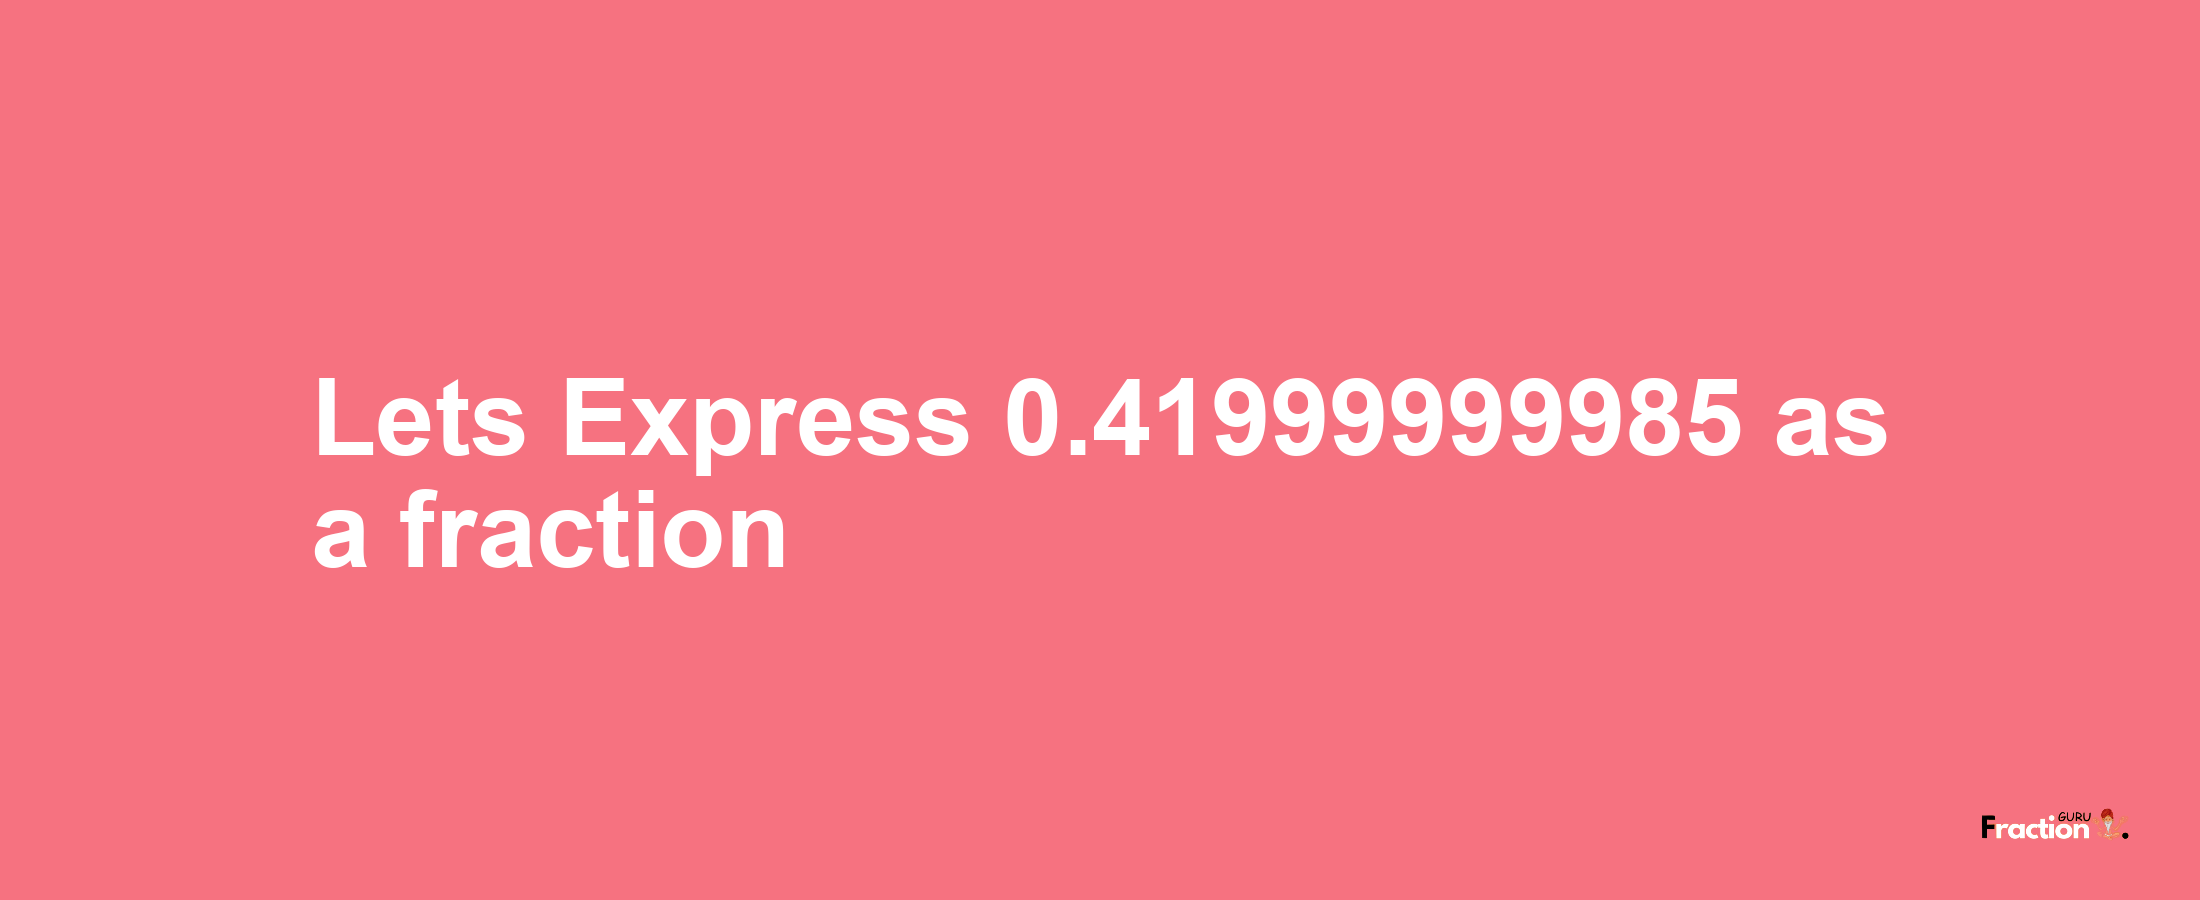 Lets Express 0.41999999985 as afraction